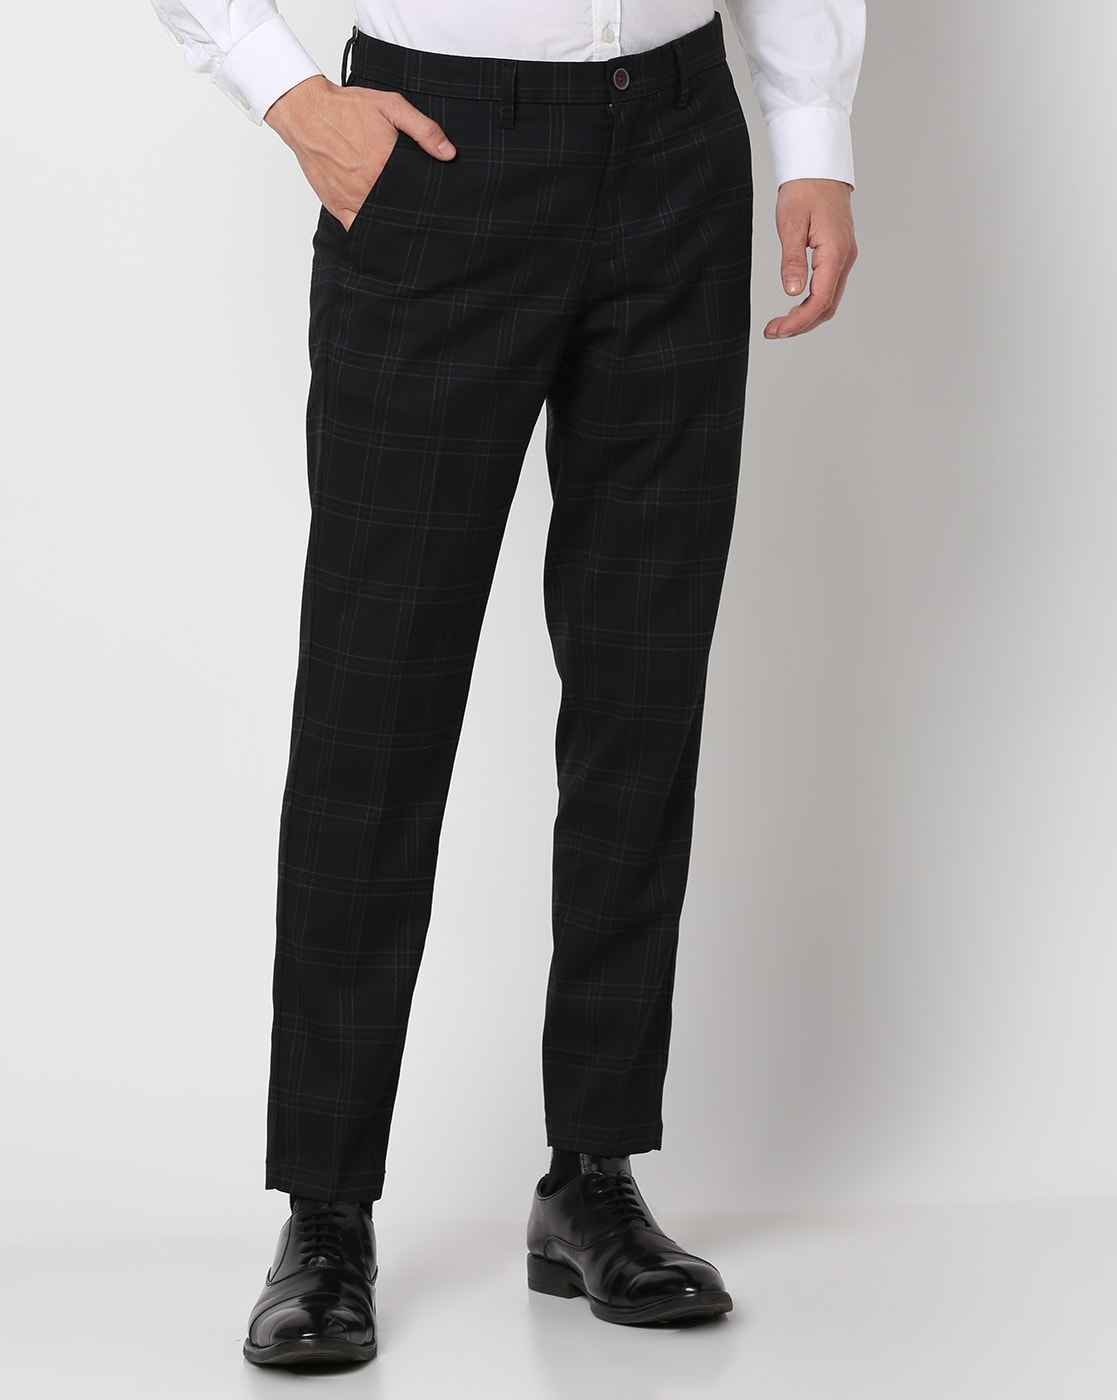 Buy INSPIRE CLOTHING INSPIRATION Men Checked Slim Fit Formal Trouser - Black  Online at Low Prices in India - Paytmmall.com